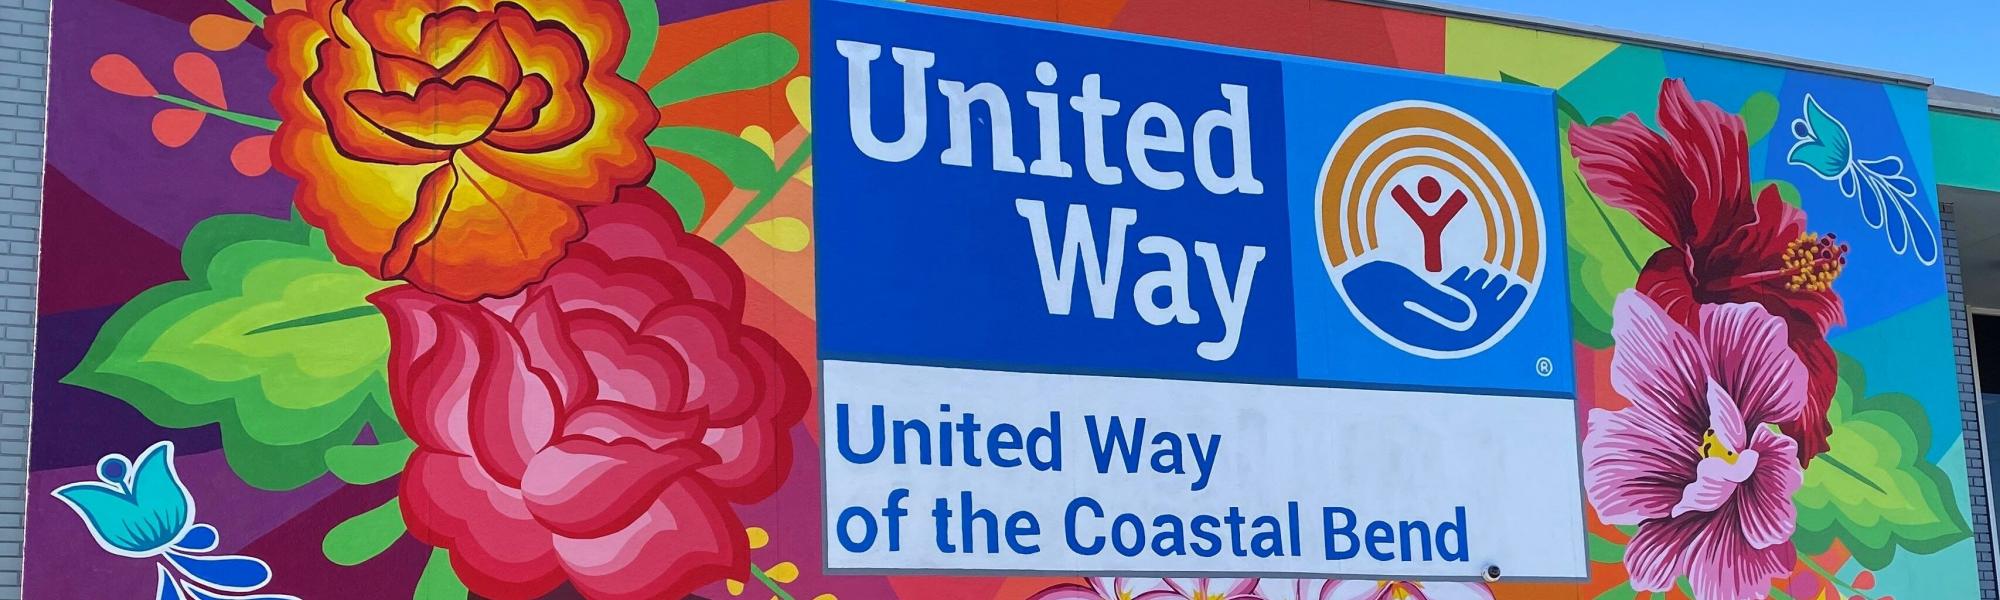 United Way of the Coastal Bend: What We Do